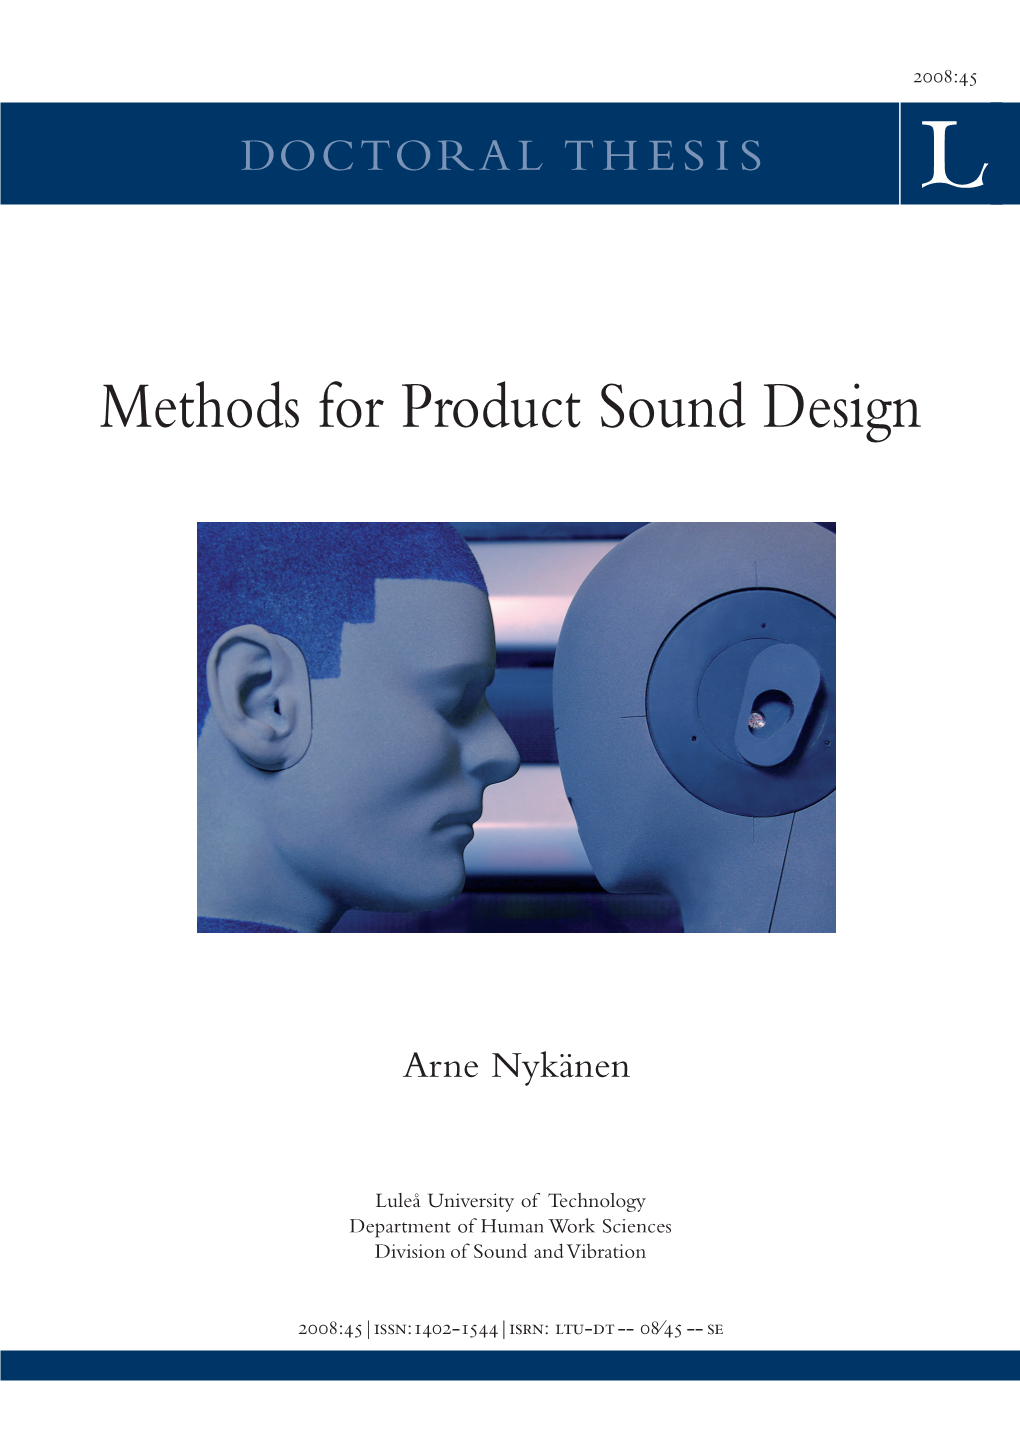 Methods for Product Sound Design Methods for Product Sound Design Productsound for Methods